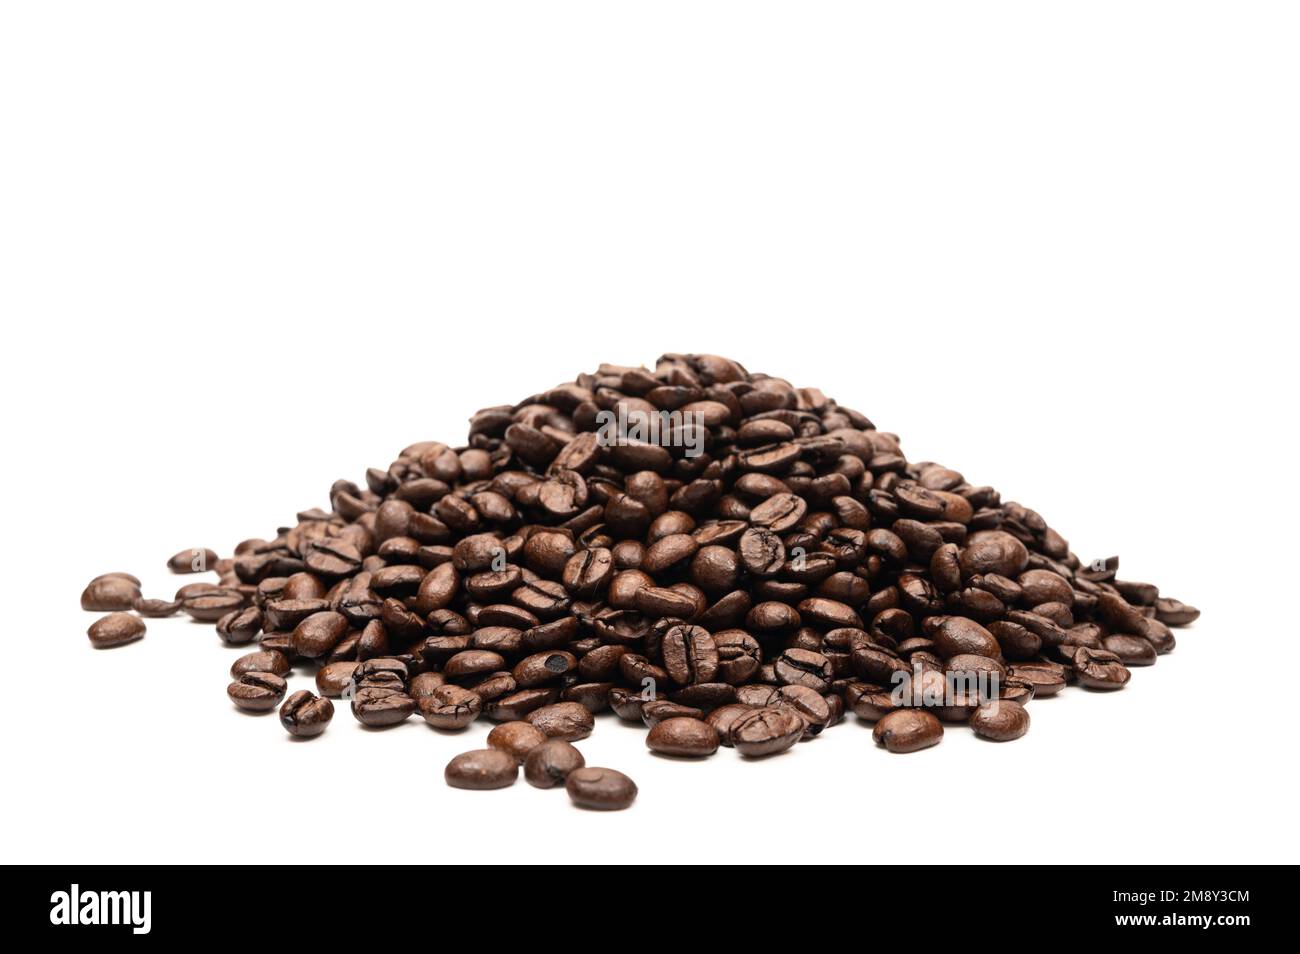 A pile of freshly roasted coffee beans. Stock Photo